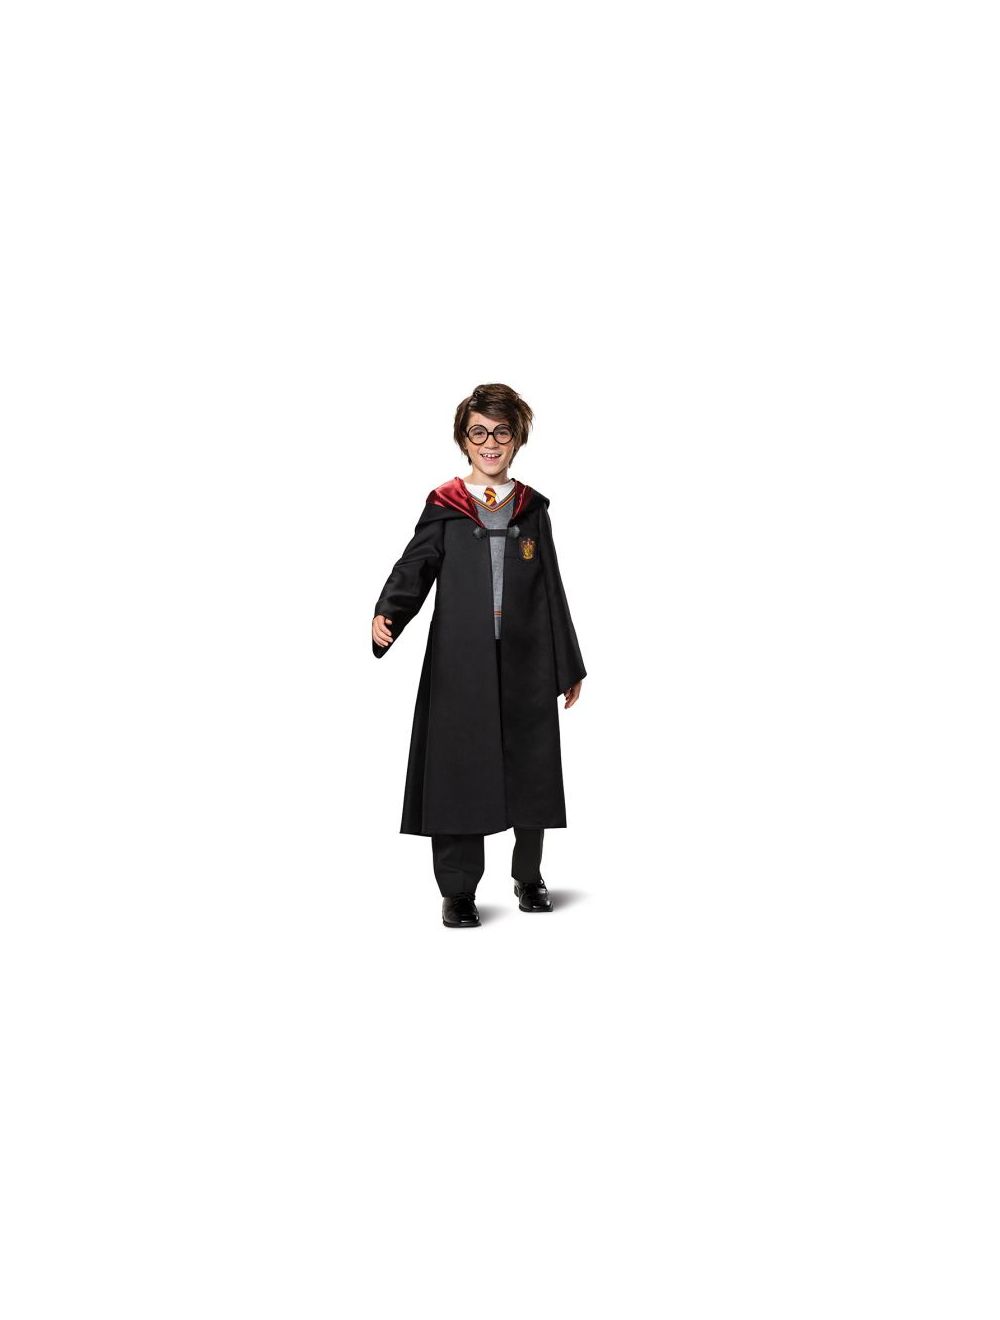 Disguise Harry Potter Costume for Kids, Classic Boys Outfit (FC01008021)